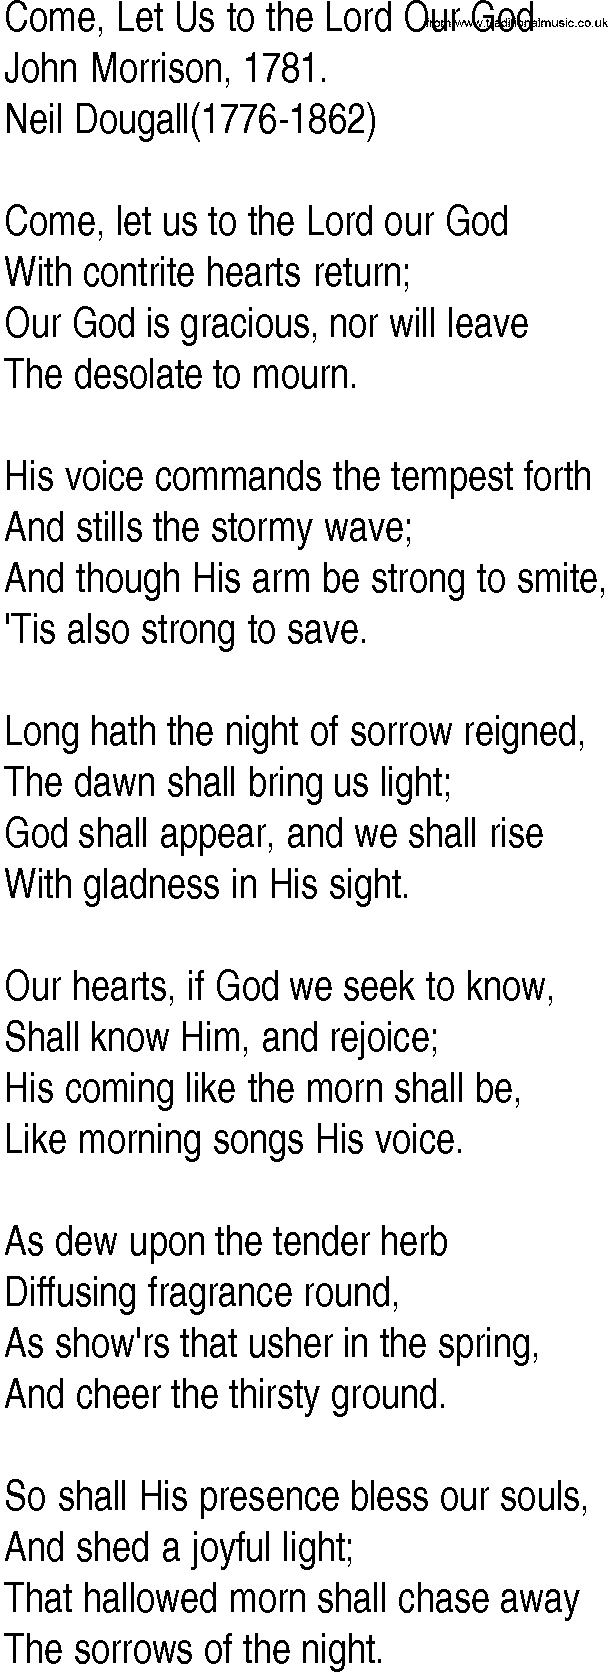 Hymn and Gospel Song: Come, Let Us to the Lord Our God by John Morrison lyrics